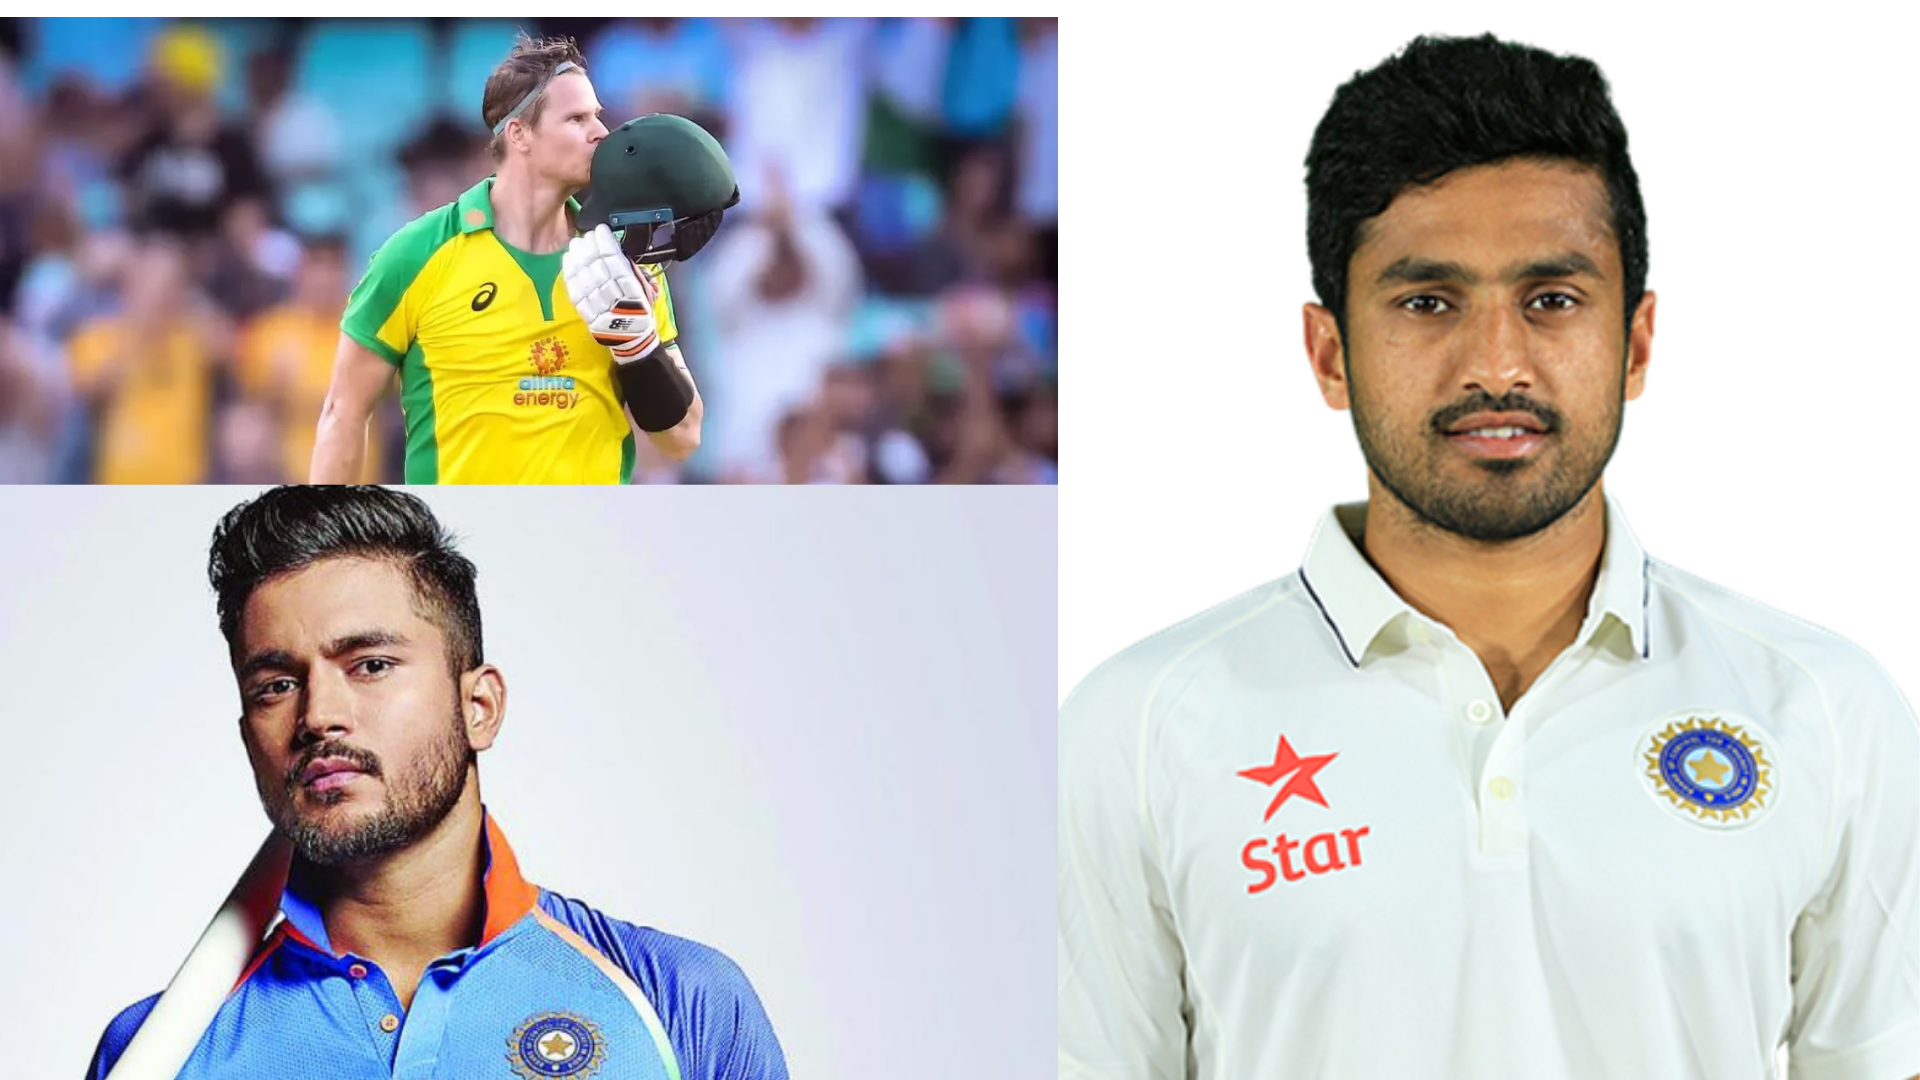 Steven Smith, Manish Pandey, and Karun Nair are not sold in the IPL auction